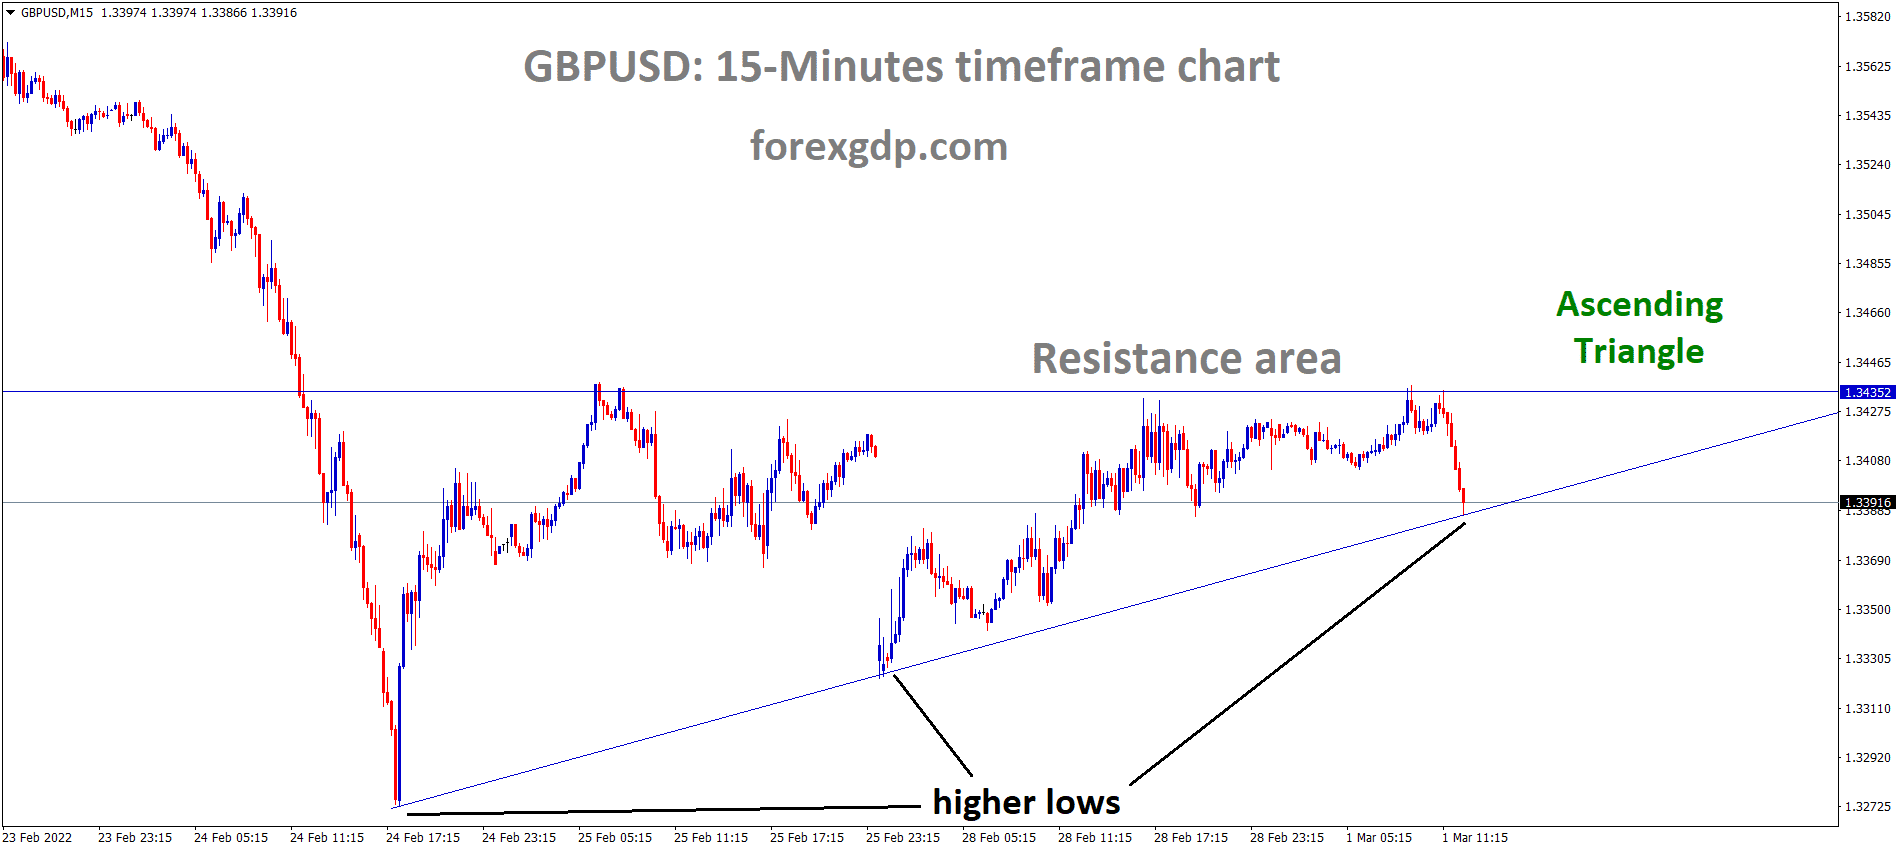 GBPUSD is moving in an ascending triangle pattern and the market has reached the higher low area of the Triangle pattern.